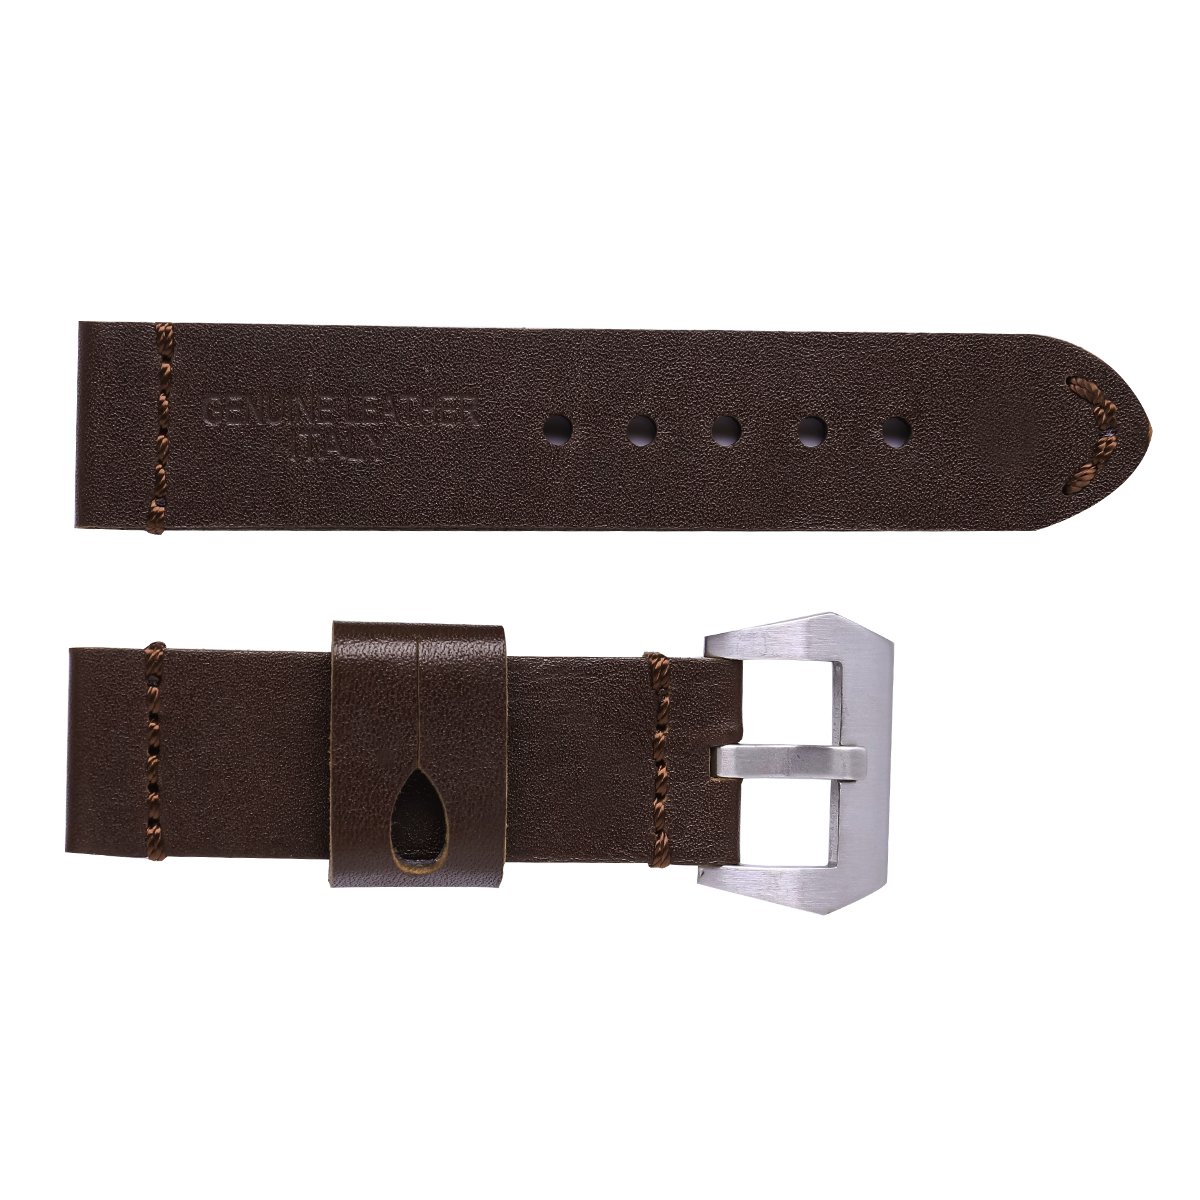 NICERIO 26mm Watch Strap Durable Calfskin Genuine Leather Watch Band Wristband for Watch Replacement (Deep Coffee with Silver Buckle)